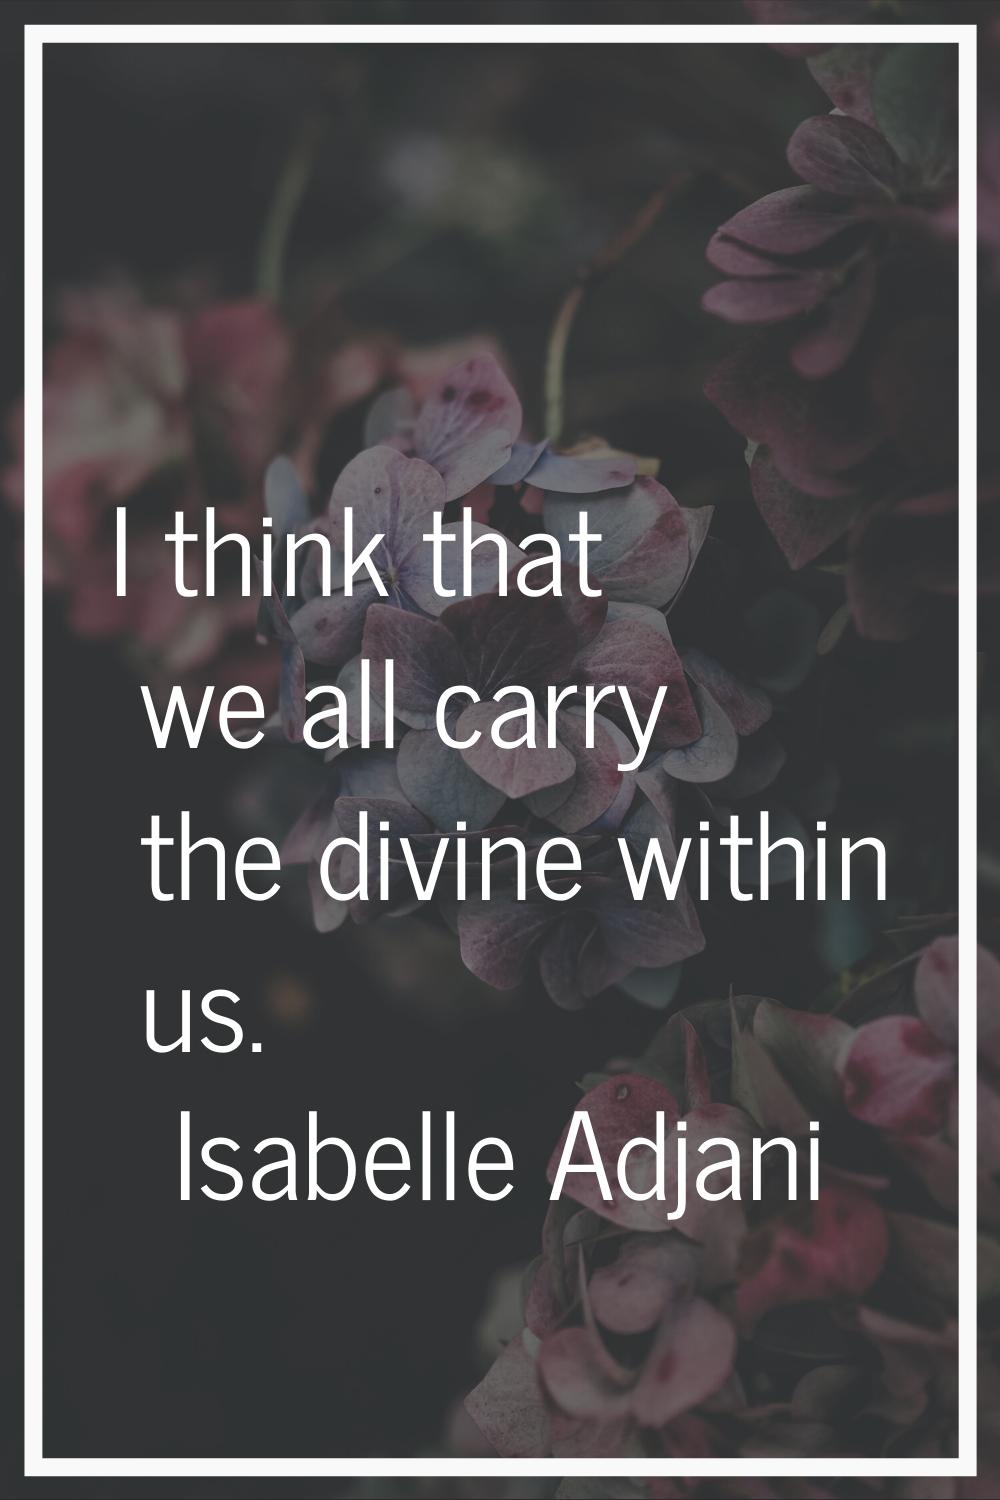 I think that we all carry the divine within us.